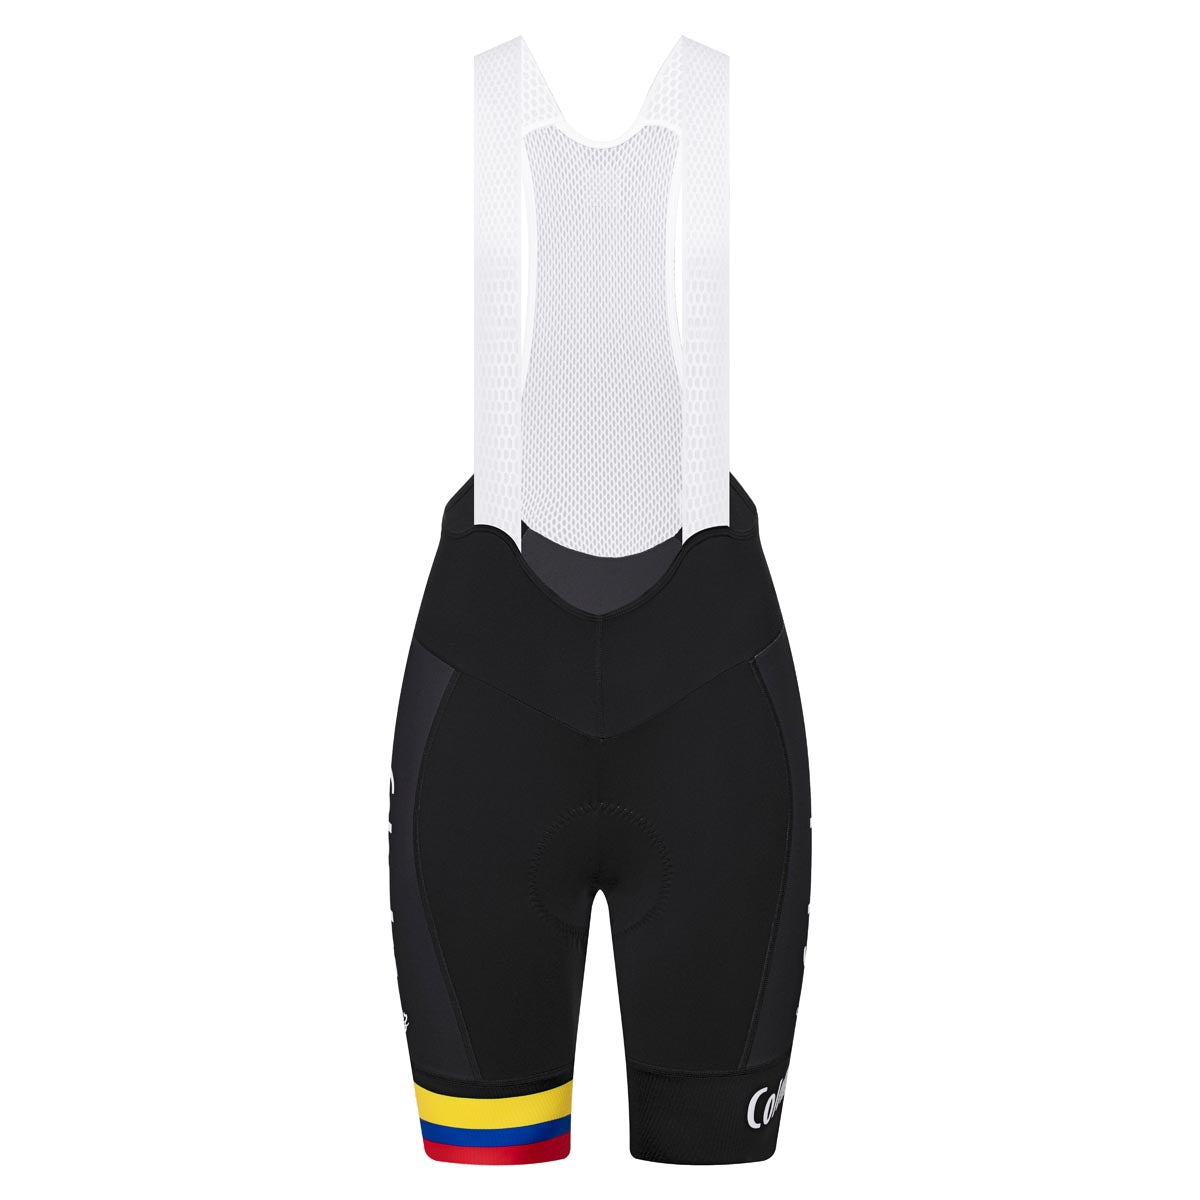 File:Black bodysuit and white cycling shorts (0776).jpg - Wikimedia Commons